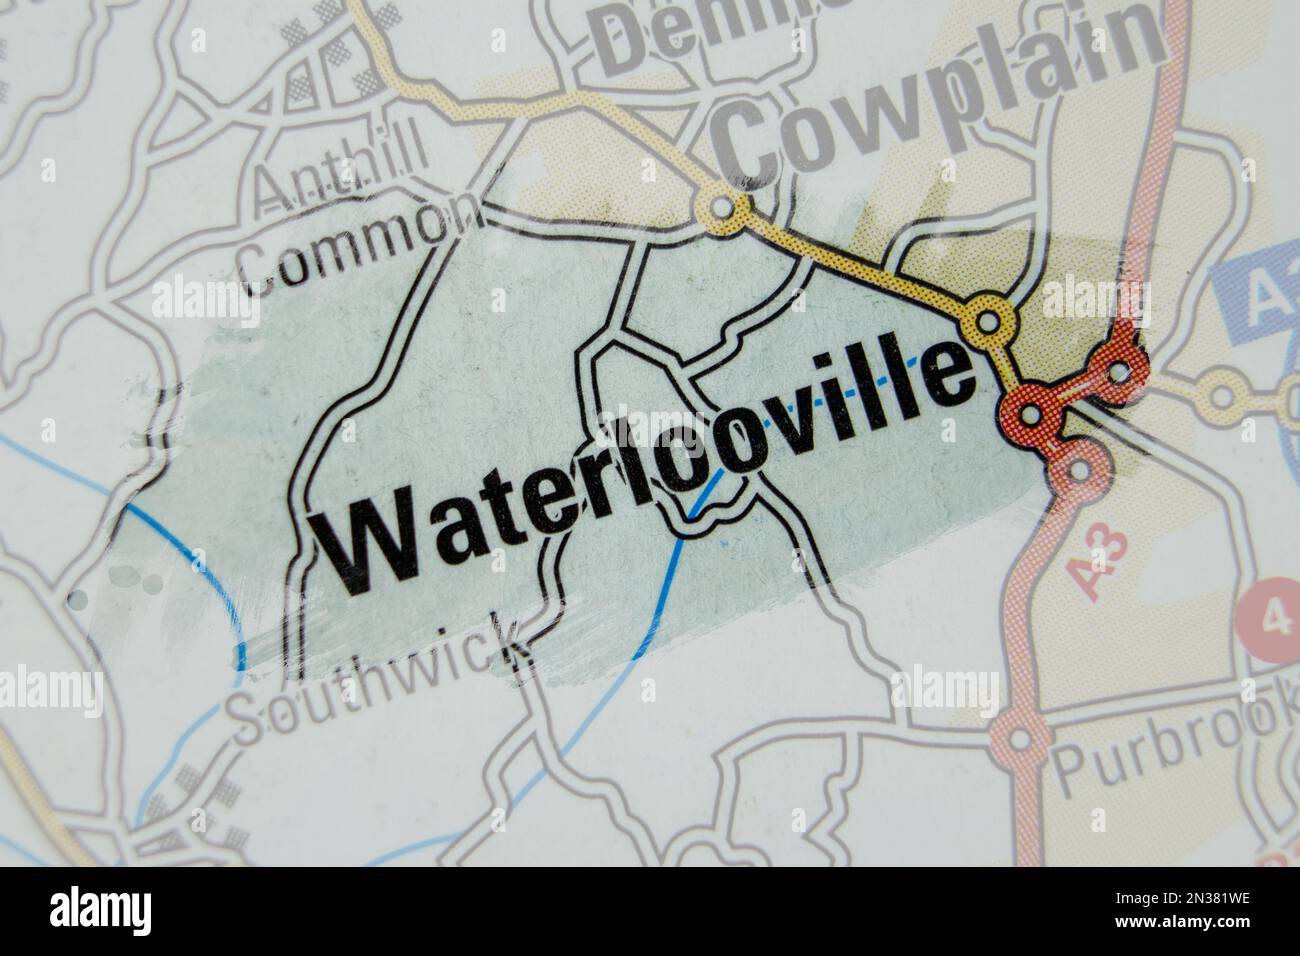 Waterlooville, Hampshire, United Kingdom atlas map town name - paint Stock Photo